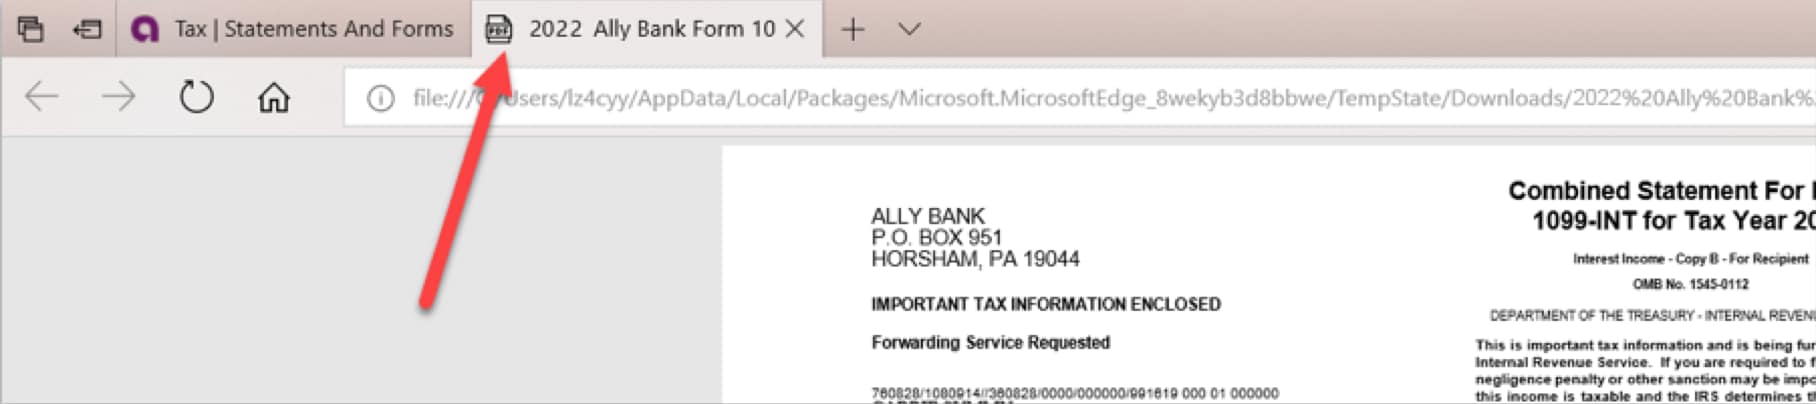 image of opened tax document displaying in a new Internet Explorer browser tab